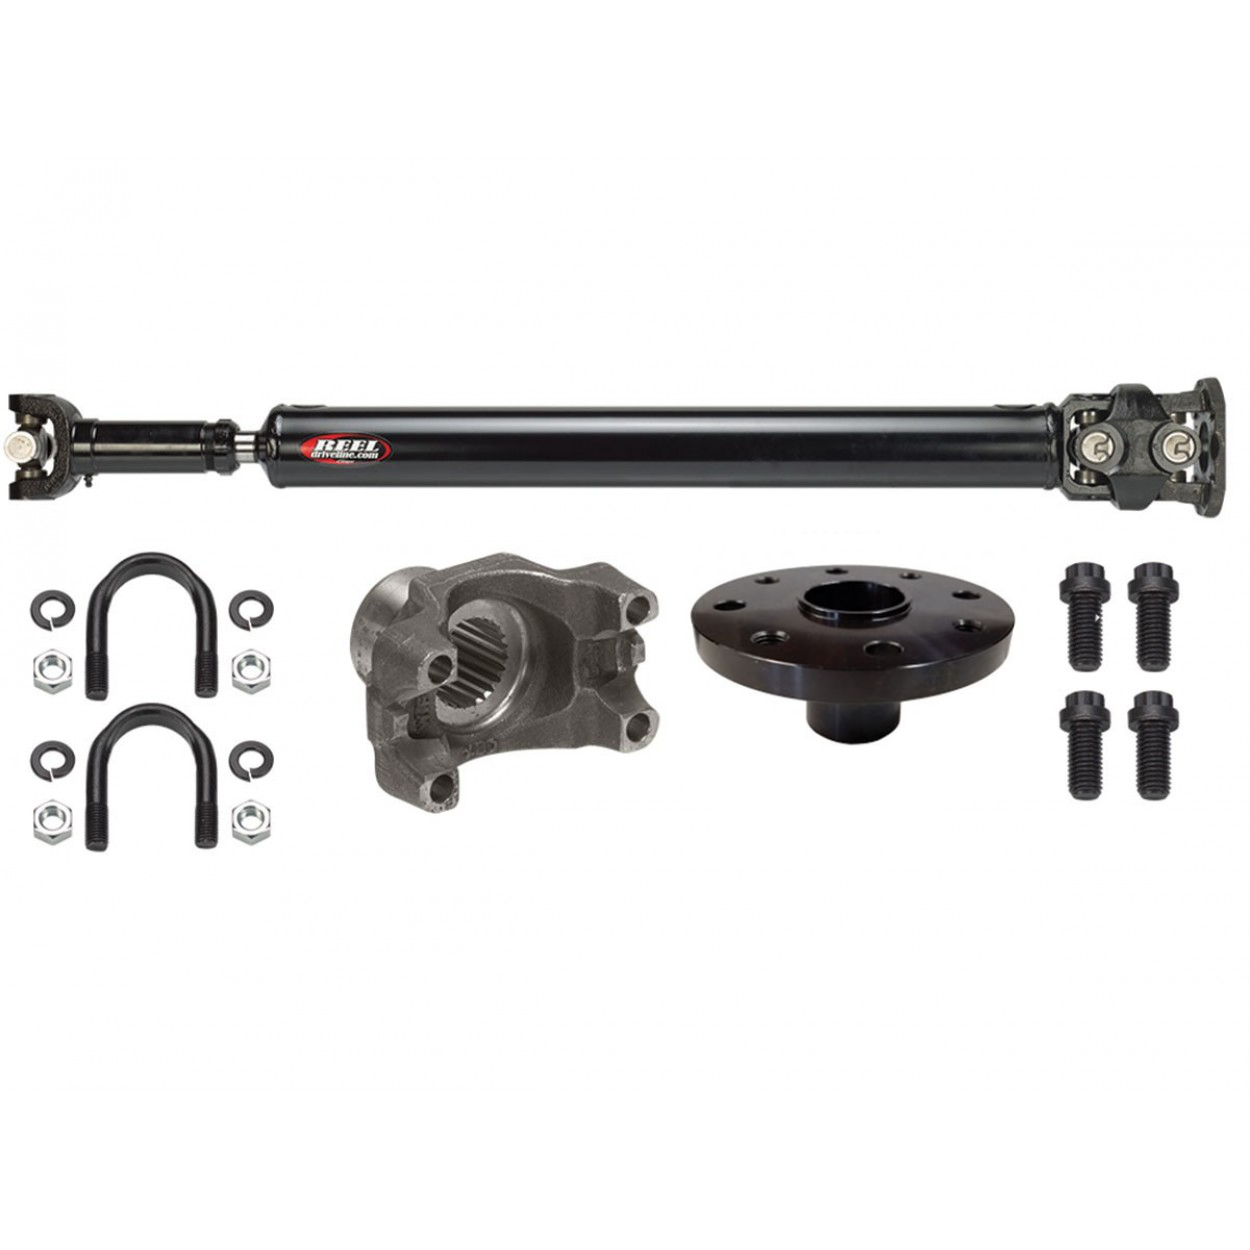 2007-2011 Jeep Wrangler JK 1350 Heavy Duty Front Driveshaft with Double  Cardan Joint, 2 or 4 Door Automatic/Manual Transmission – reeldriveline